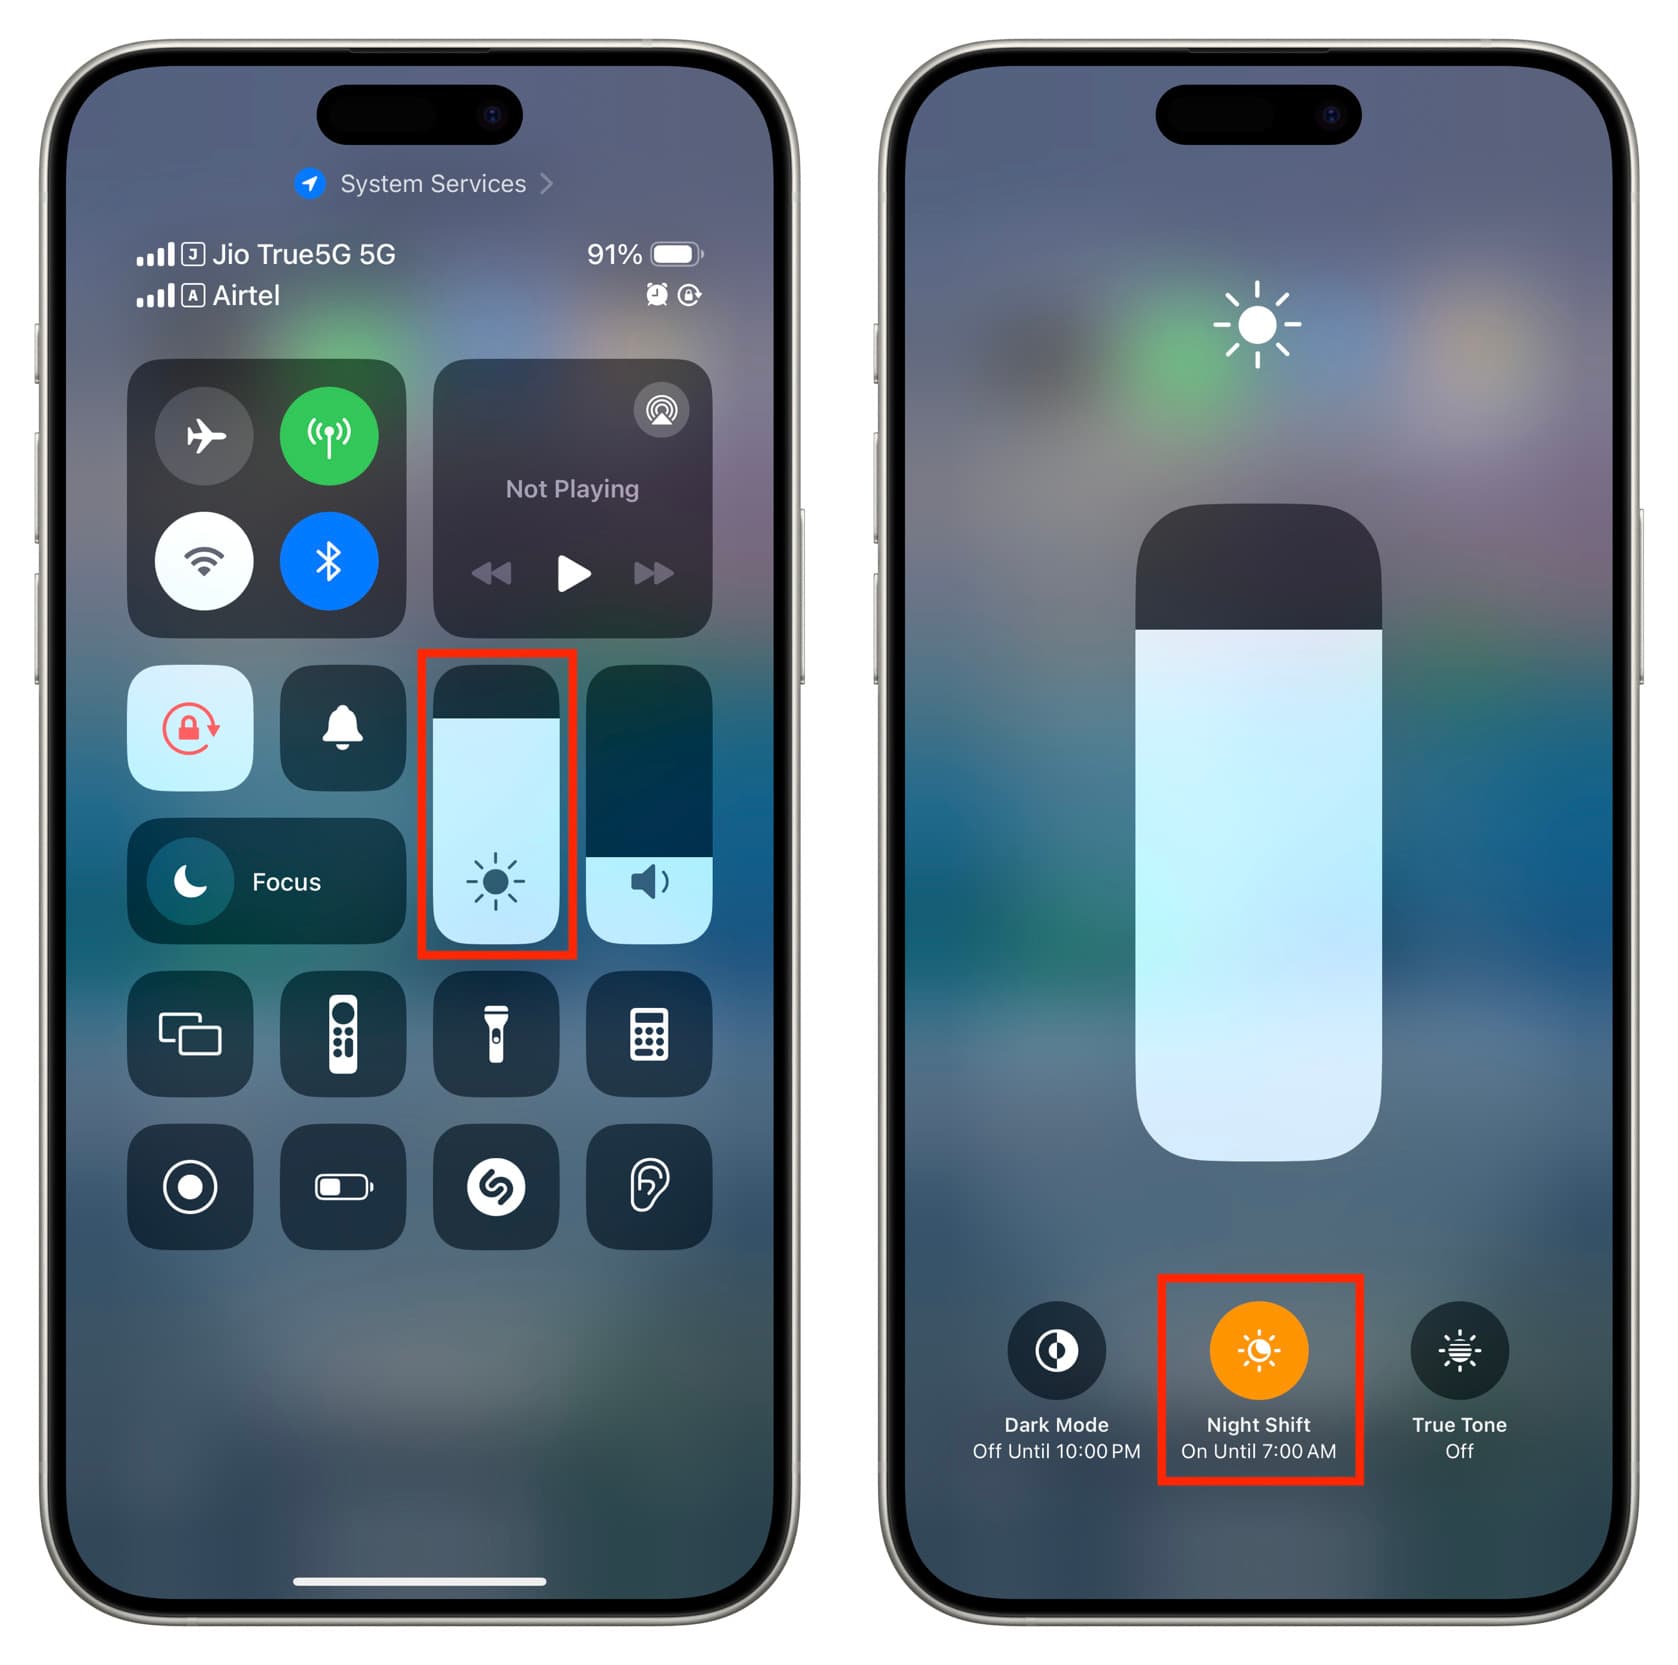 Activate Night Shift from iPhone Control Center